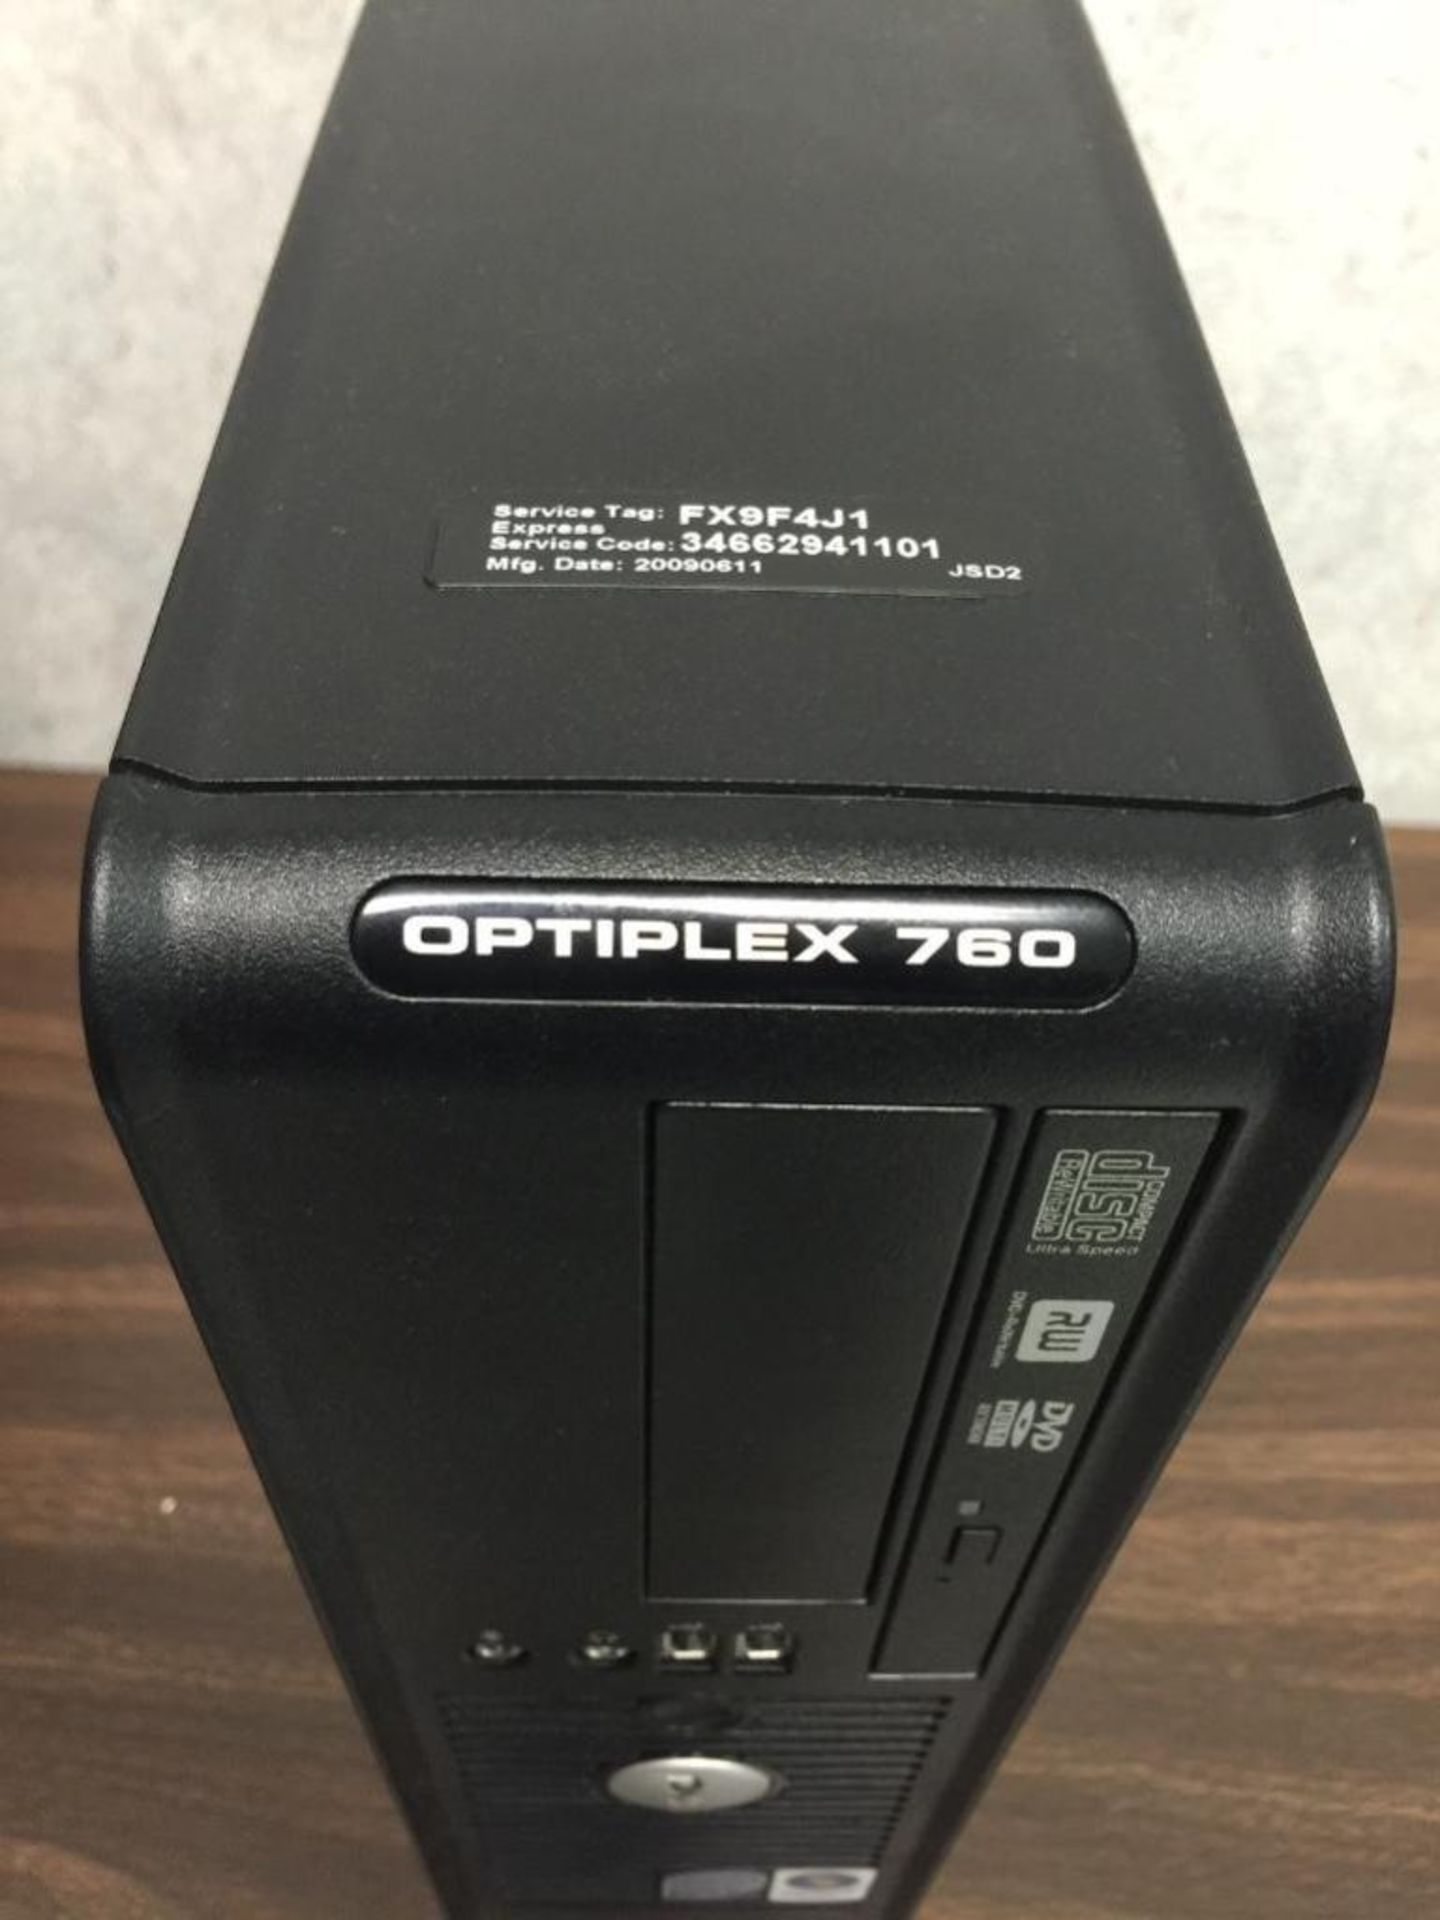 Dell Optiplex 760 (2 Ultra Small Form Factor) - Image 2 of 2